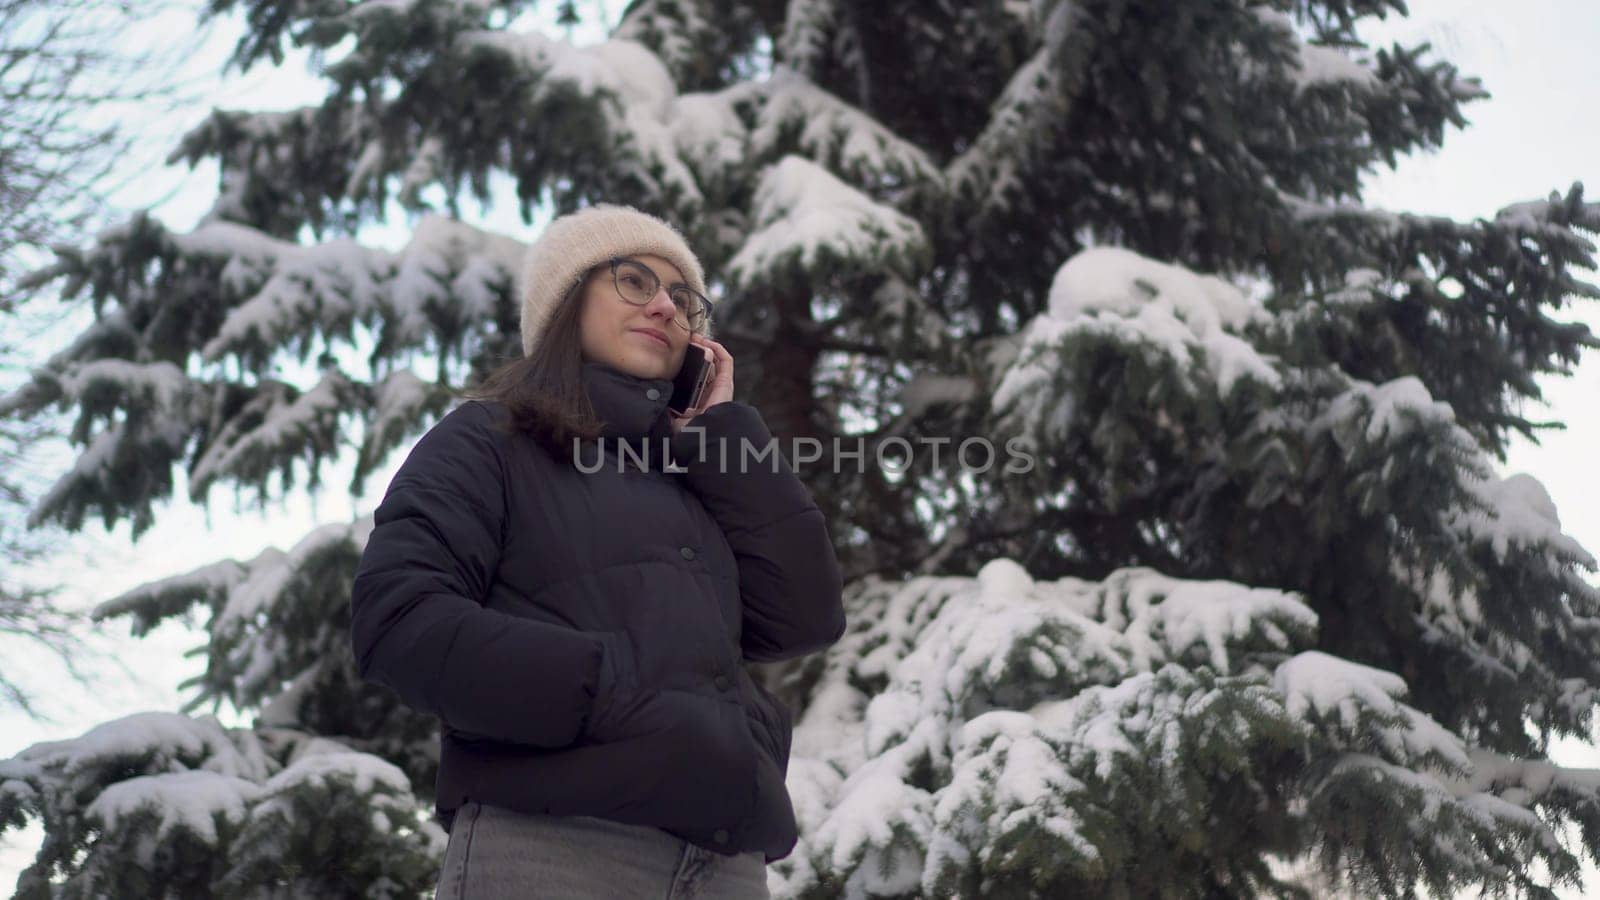 A young woman speaks on the phone near a tall spruce tree in winter. A girl with glasses communicates via cell phone against the backdrop of snowy spruce branches. 4k